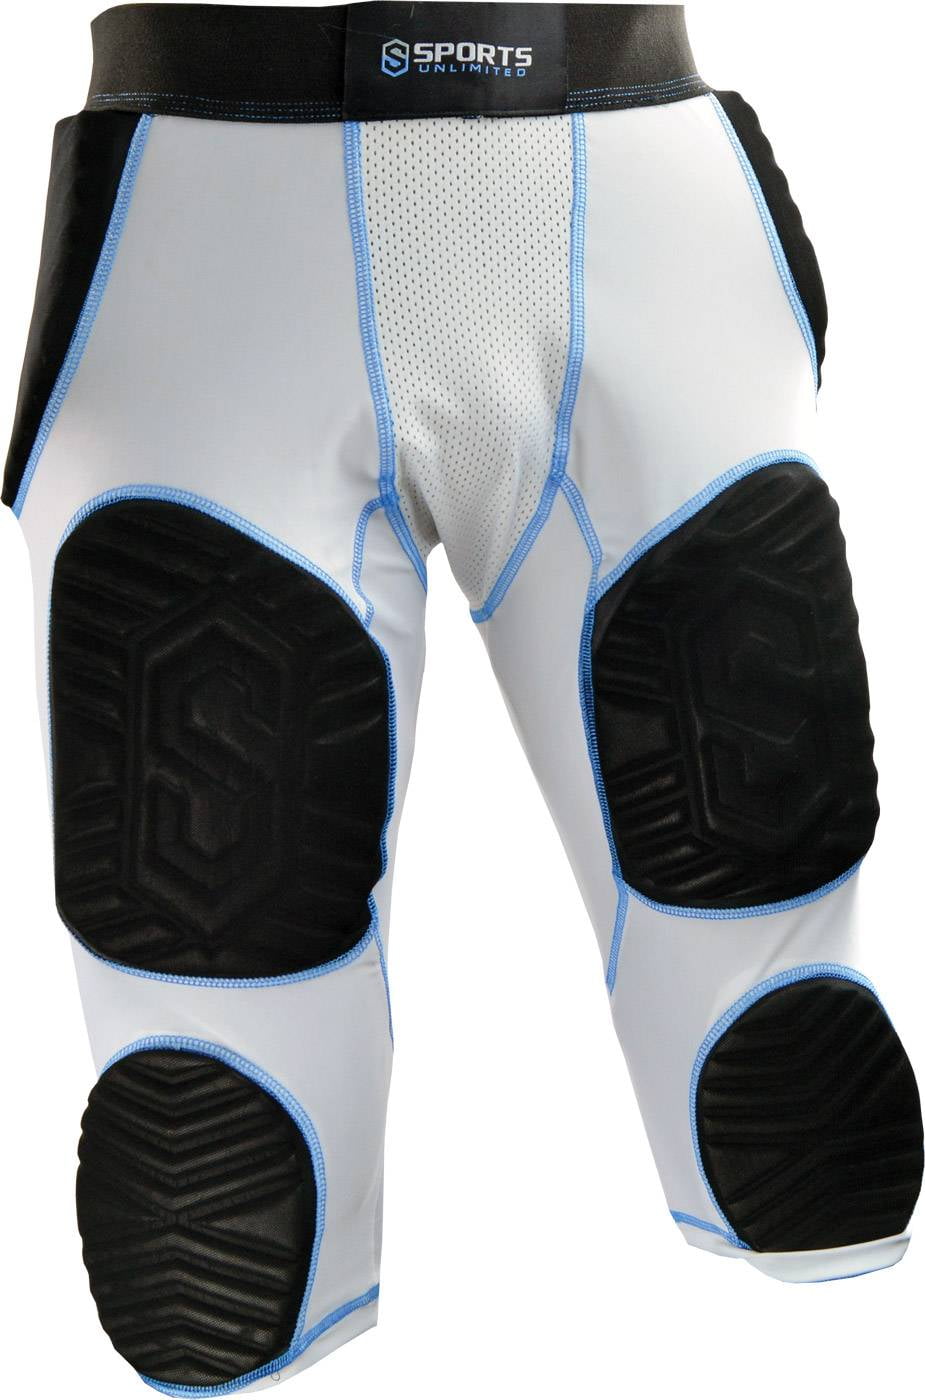 Sports Unlimited Adult 7 Pad Integrated Football Girdle Flex Thigh Pads 